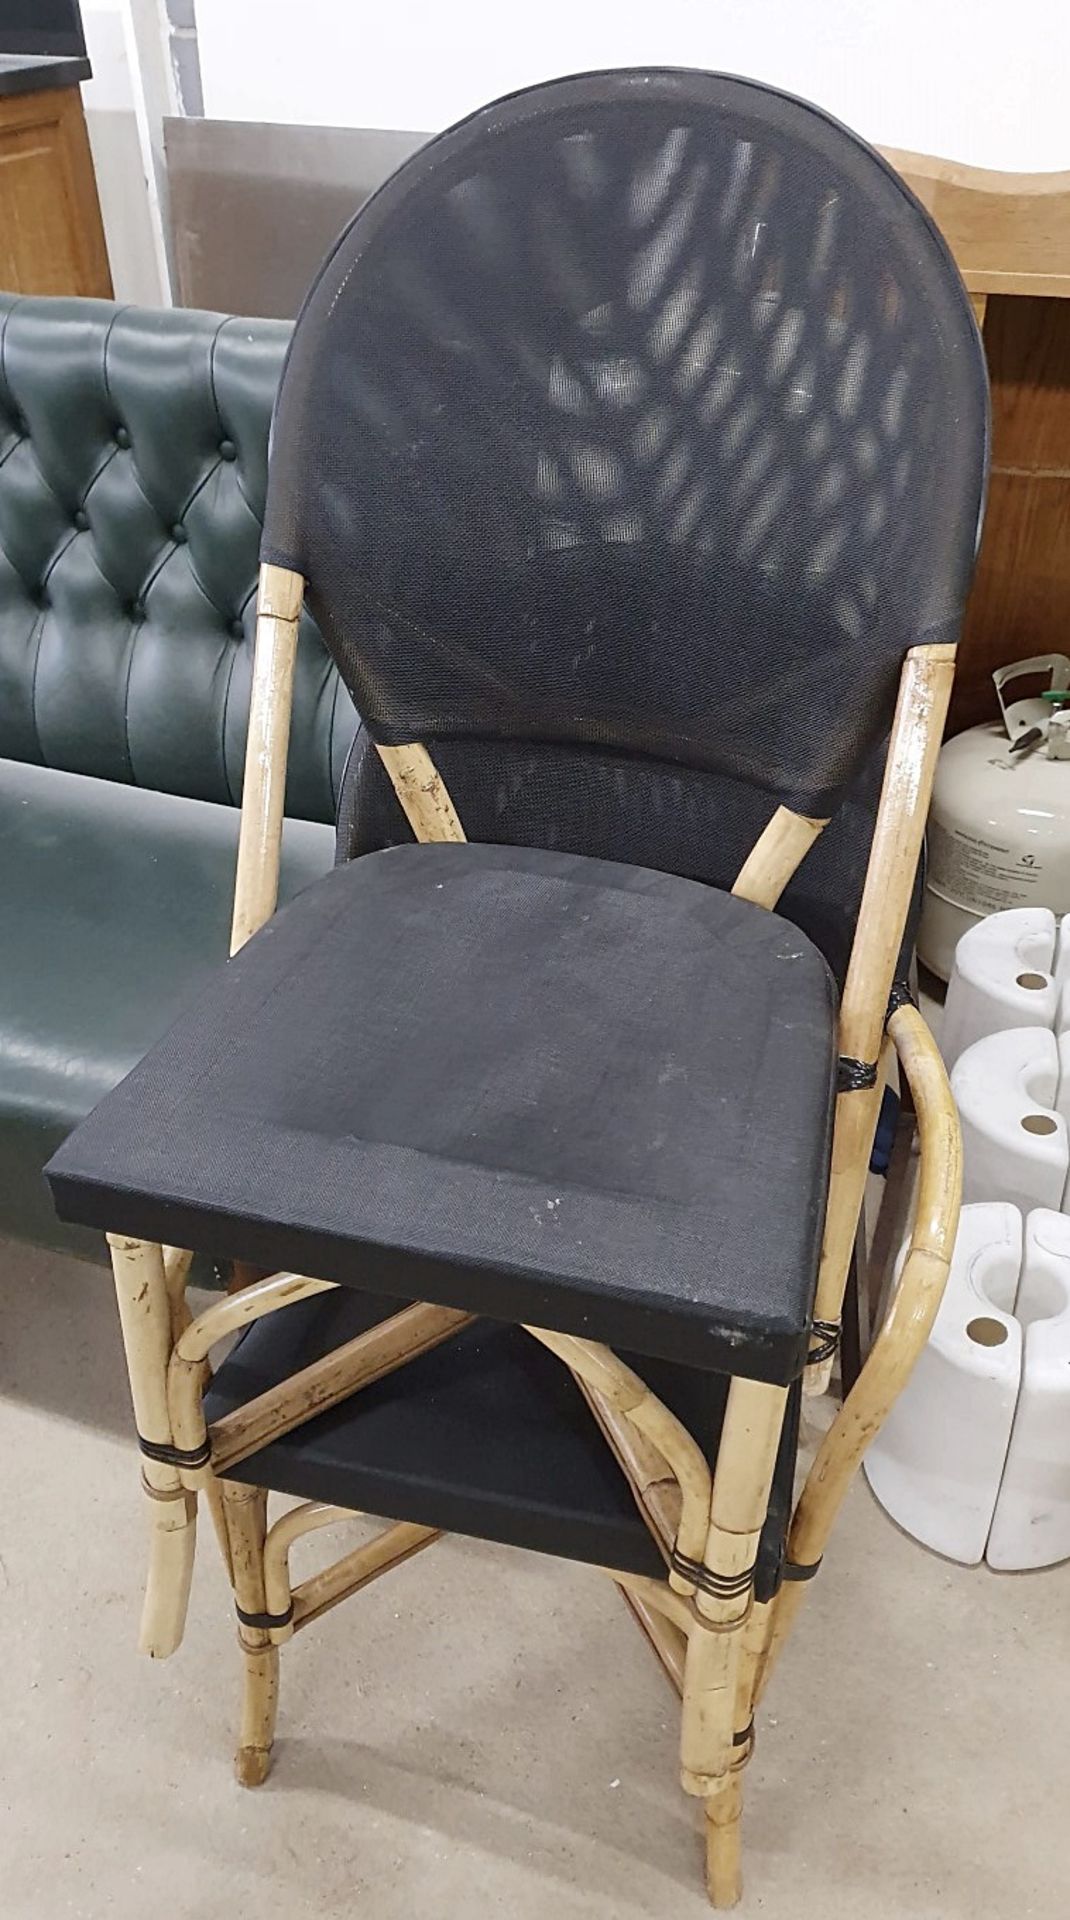 5 x Bamboo Studio Chairs With Black Seat and Back Rest - Dimensions: H44/88 x W54 x D39 cms - Image 4 of 5